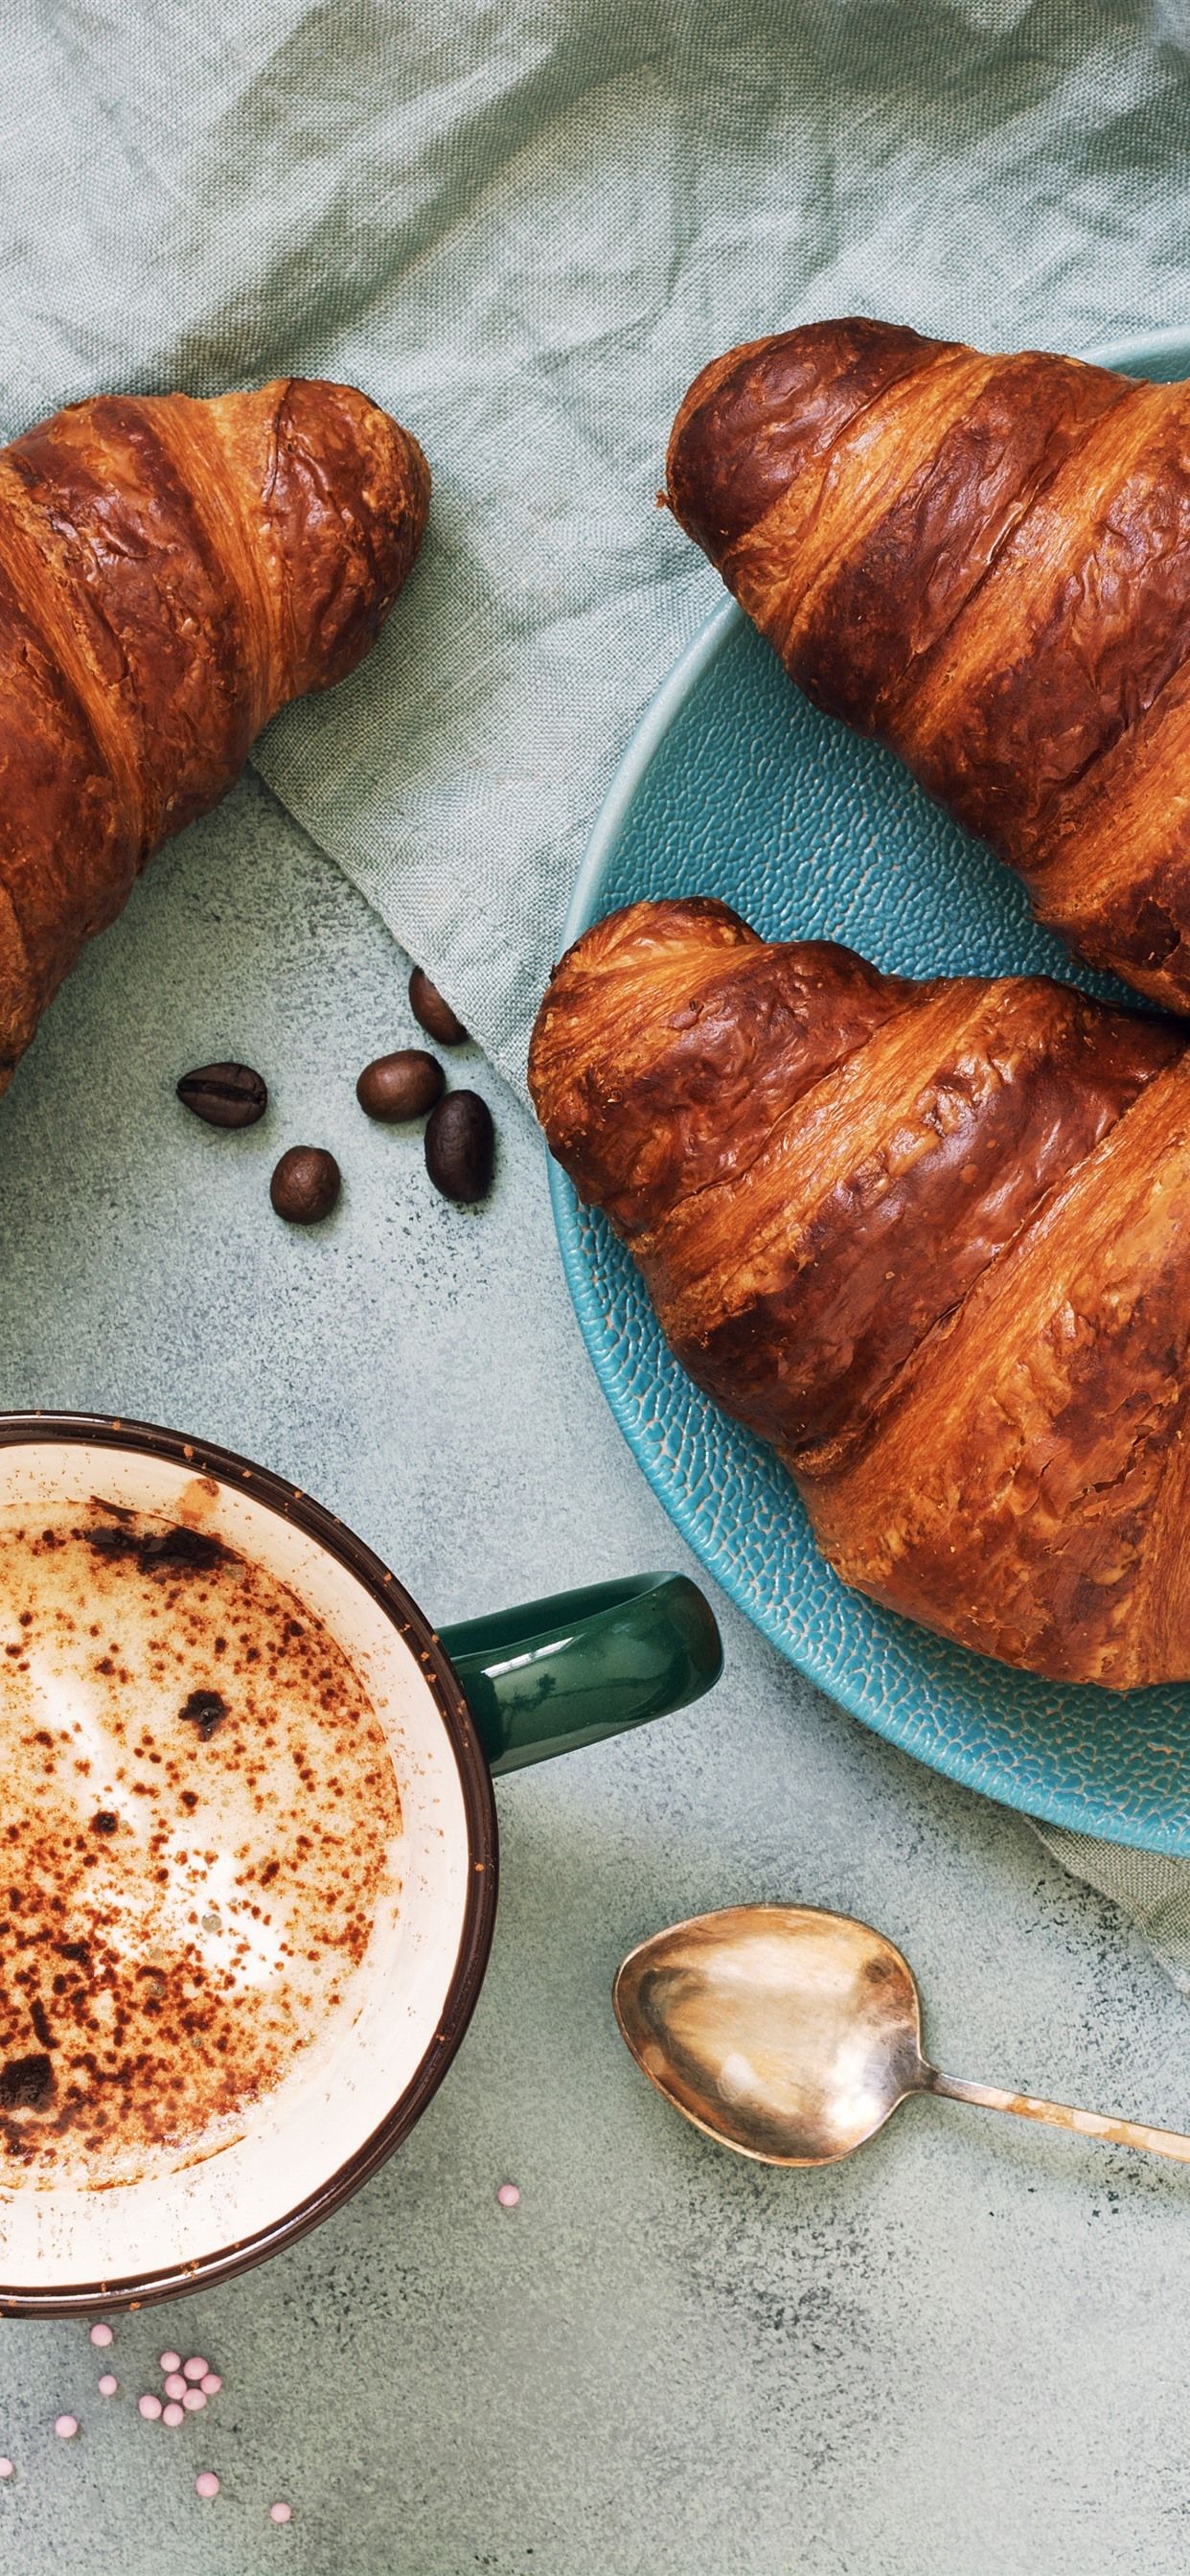 1242x2688 Breakfast Croissants Some Bread Coffee 1242x2688 Iphone 11 Pro Xs Max Wallpaper Background Picture Image